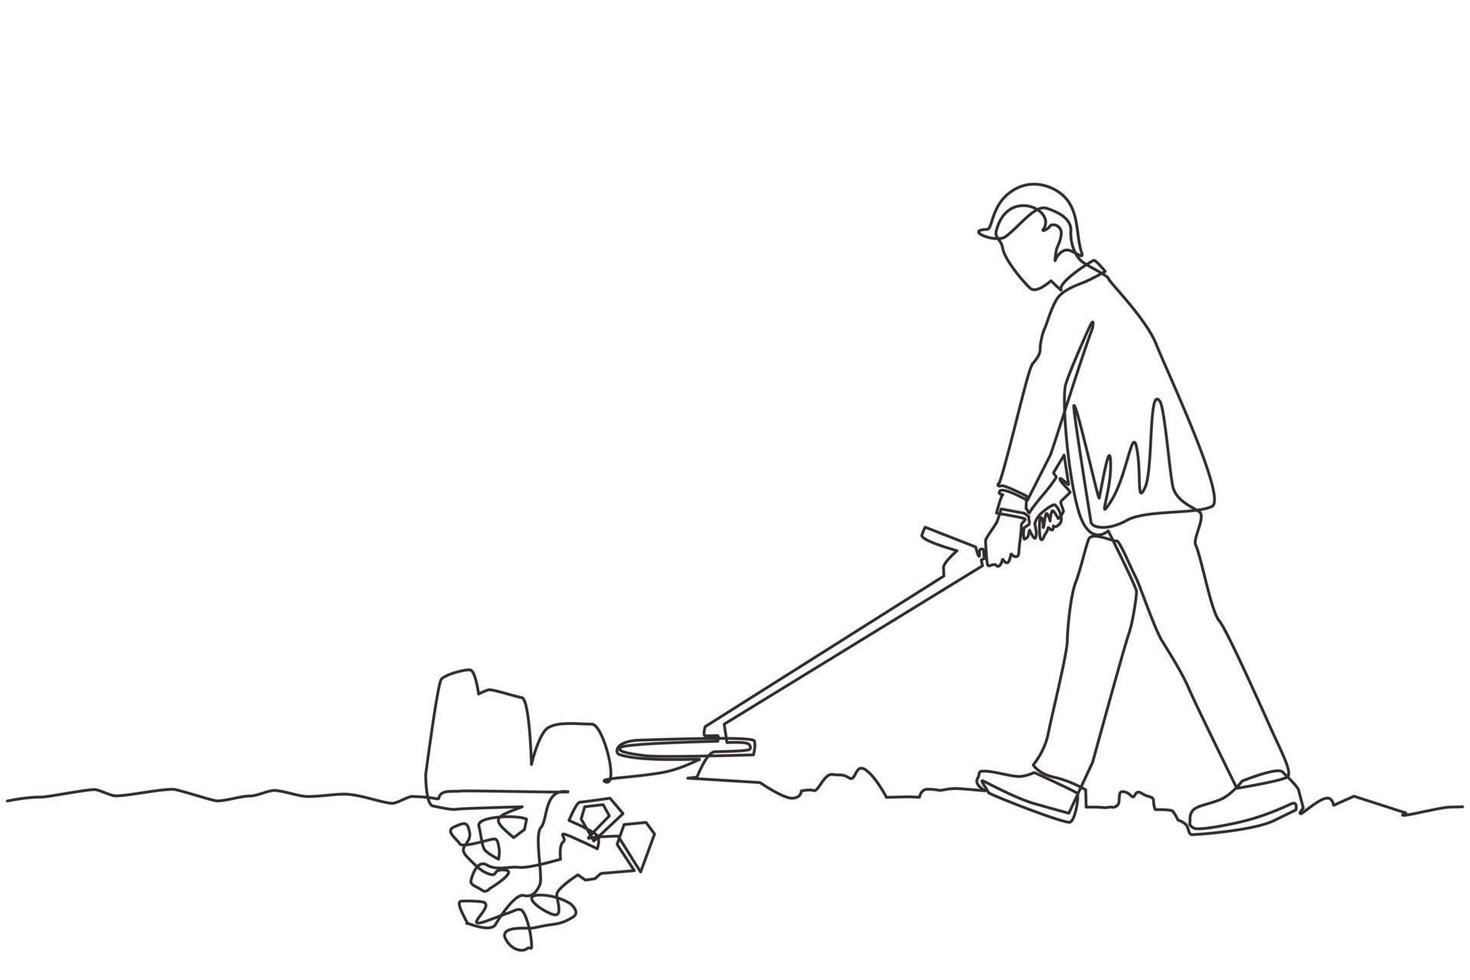 Continuous one line drawing businessman with metal detector looking for pile of diamonds. Man treasure hunter with metal detector finding precious stone. Single line draw design vector illustration